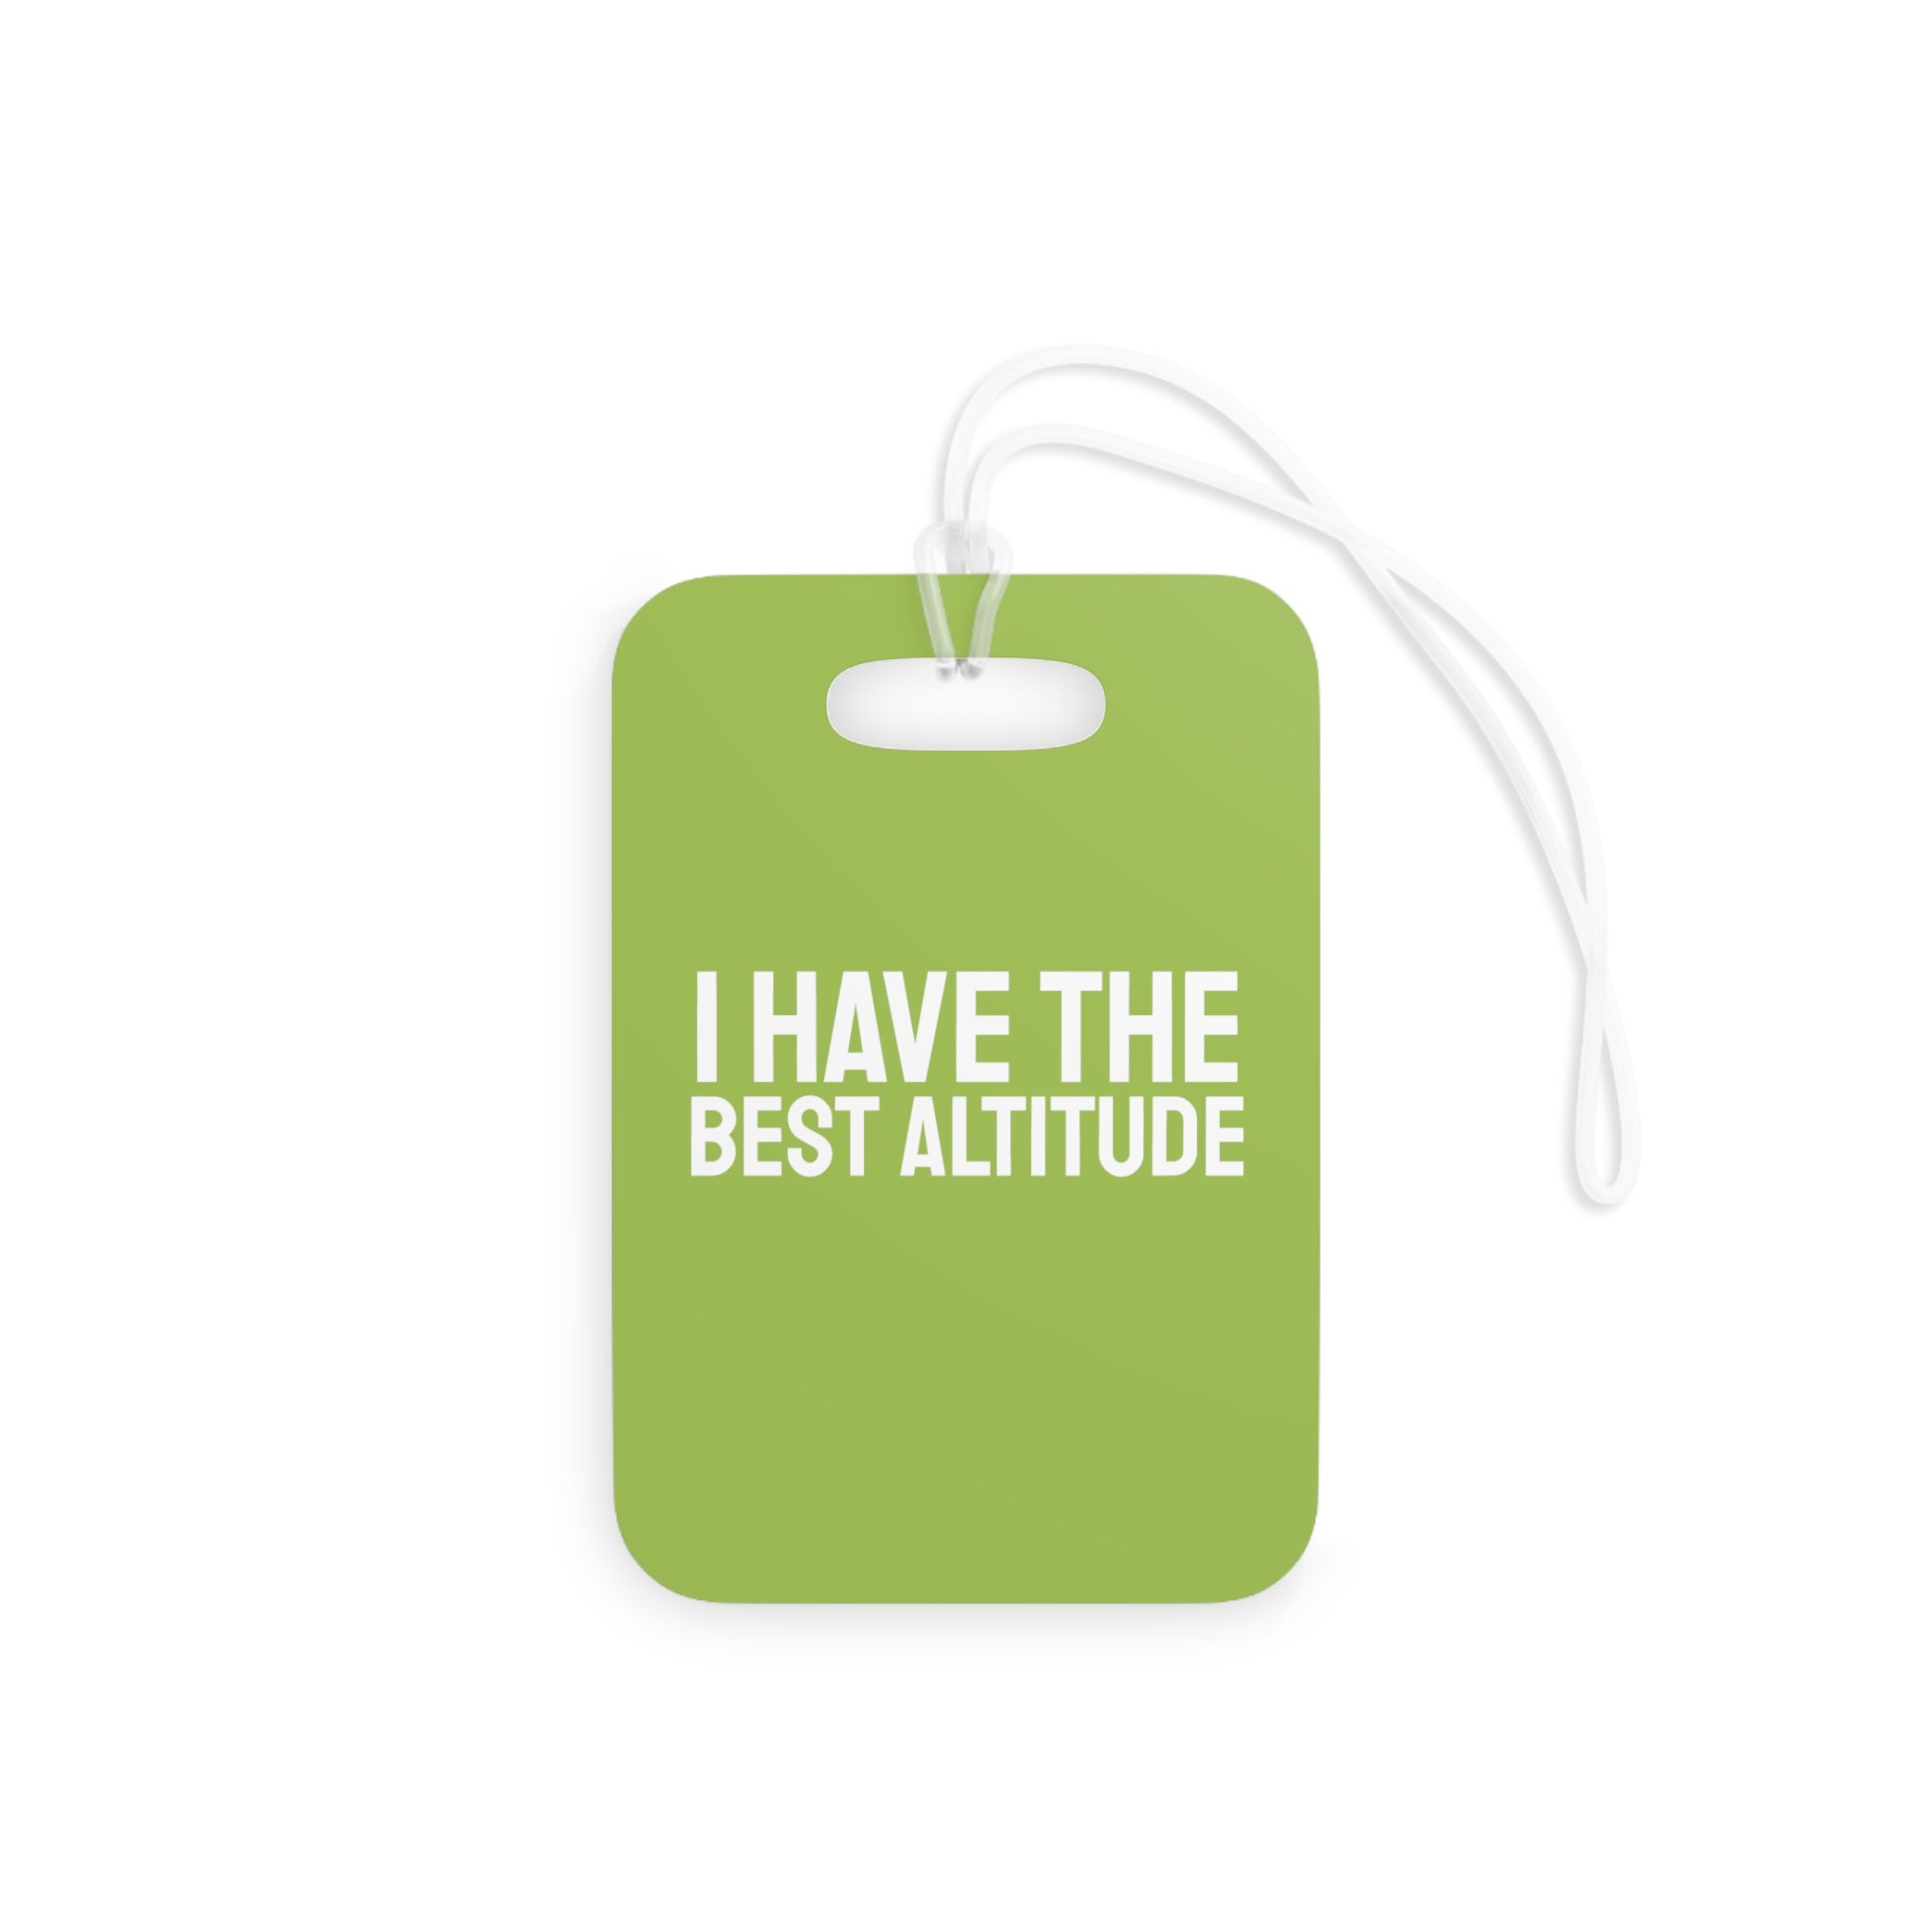 I have the best altitude Luggage Tag (Green)